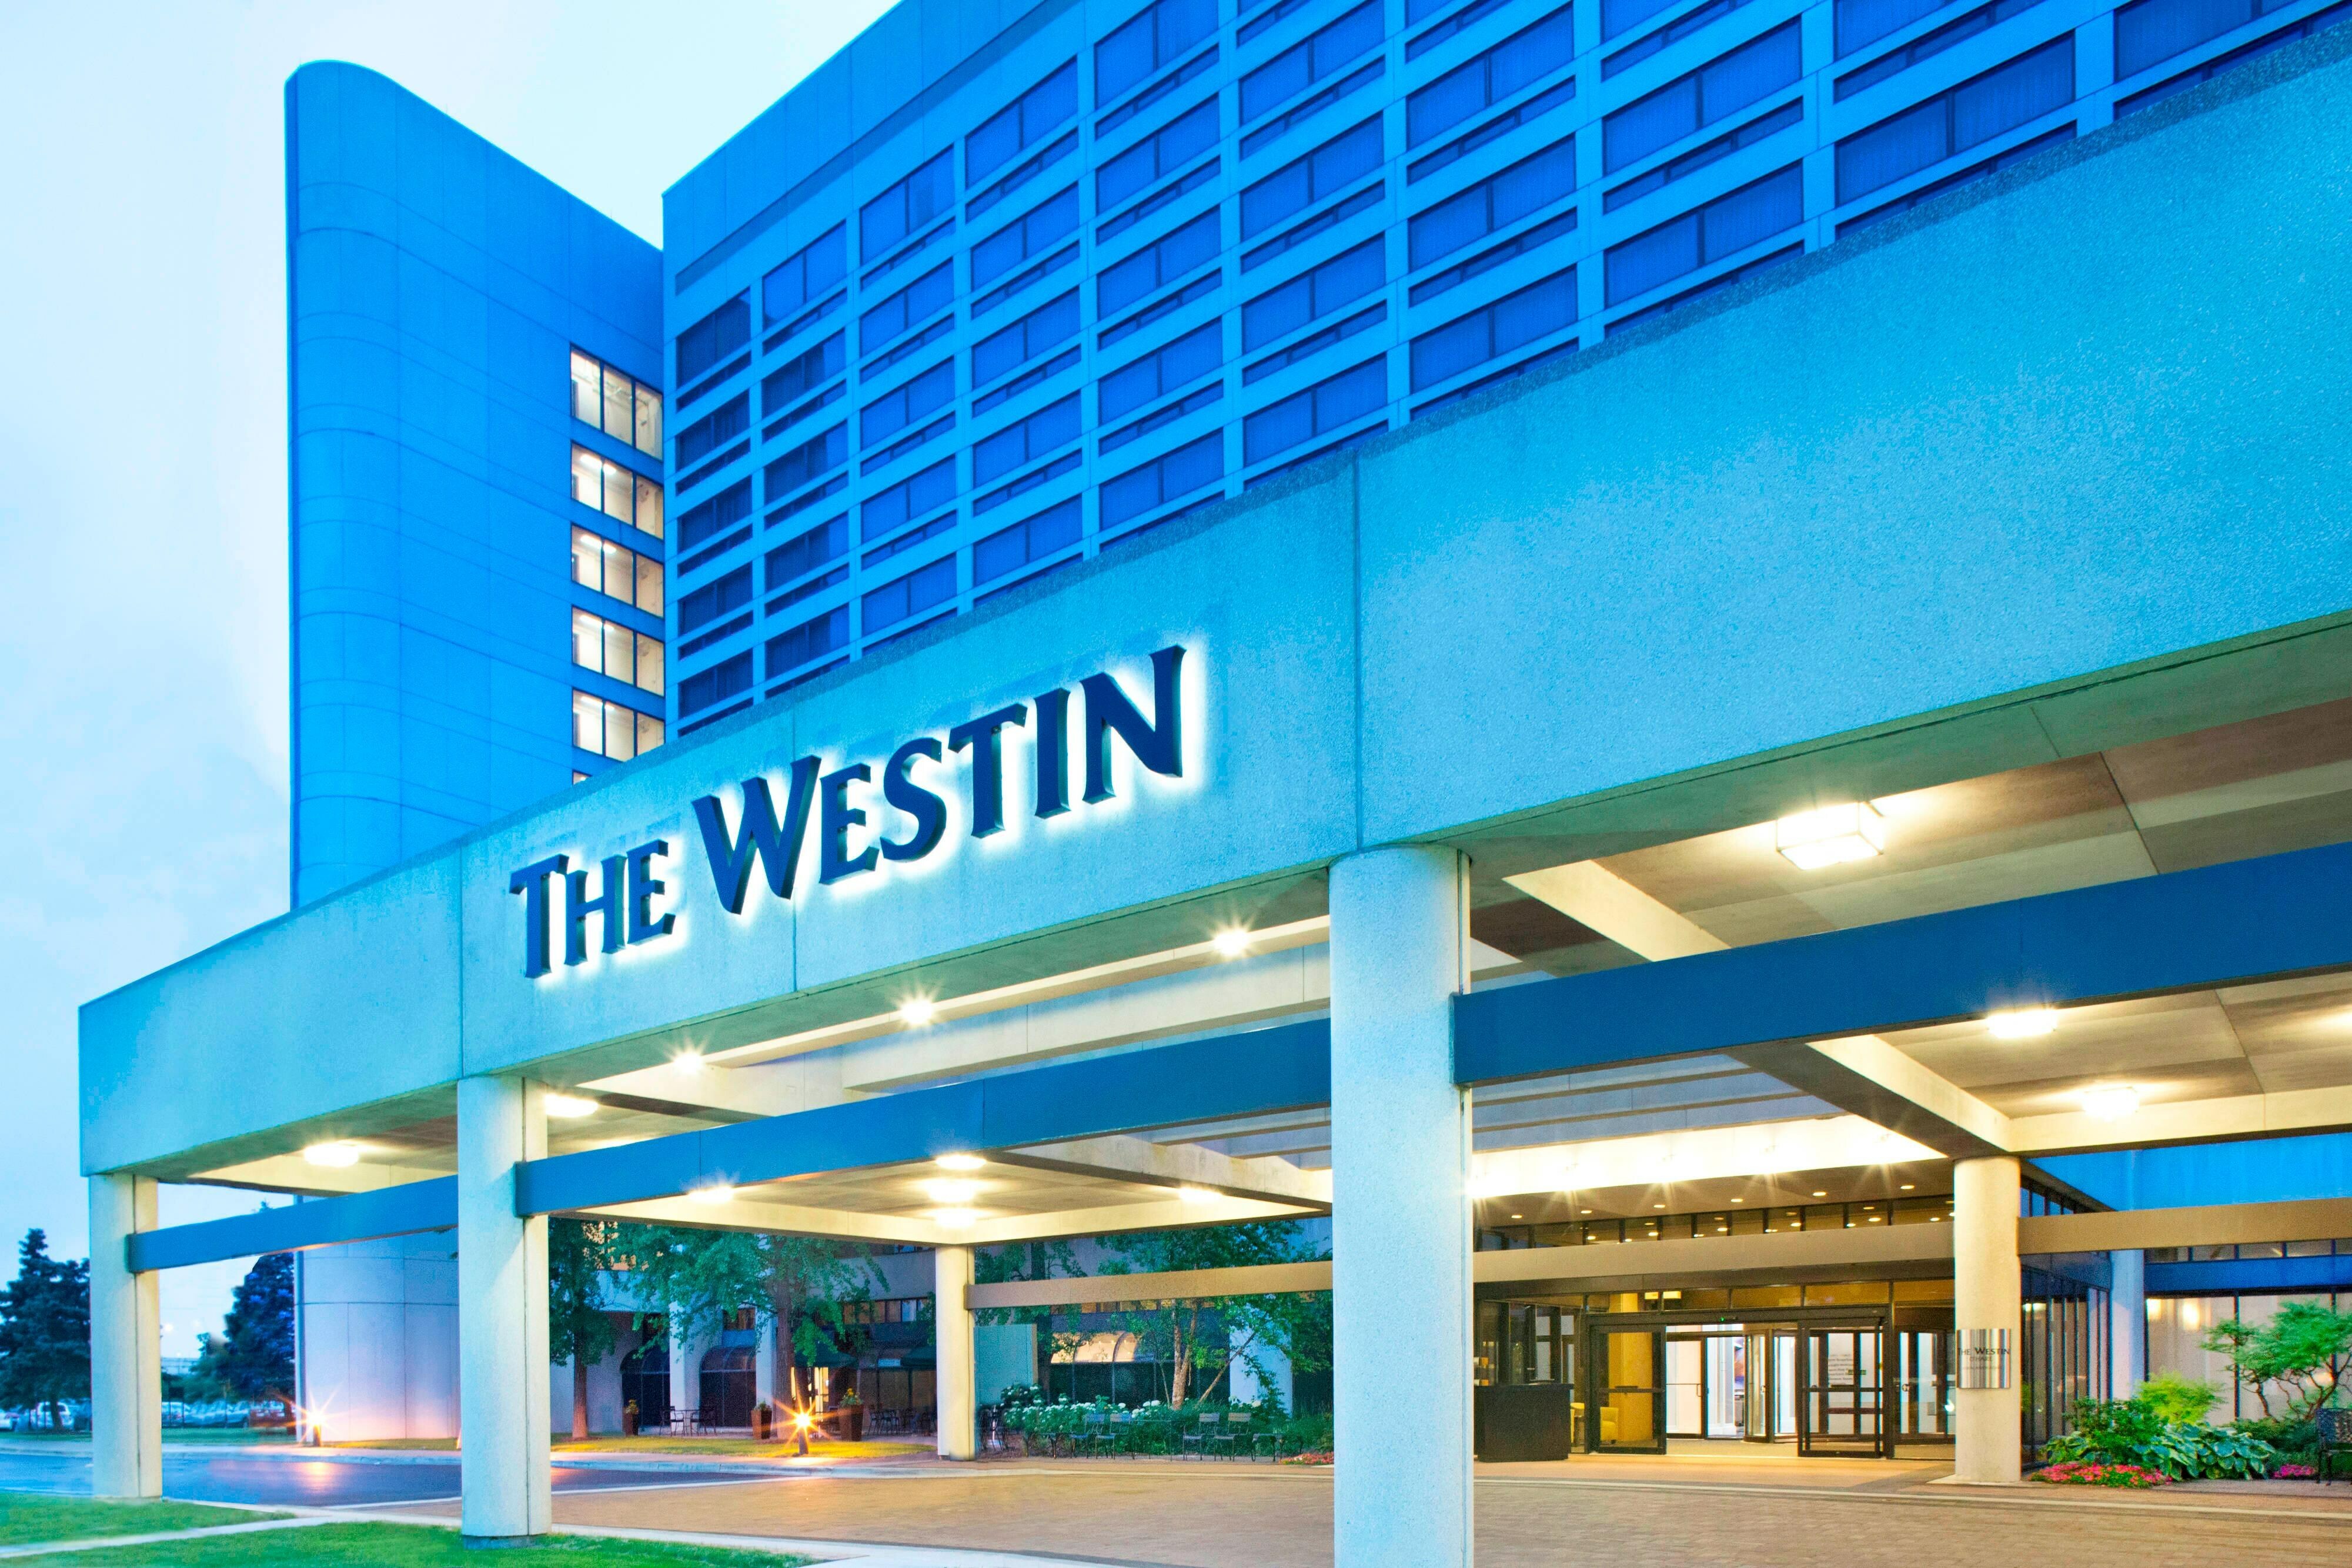 Photo of The Westin O'Hare, Rosemont, IL